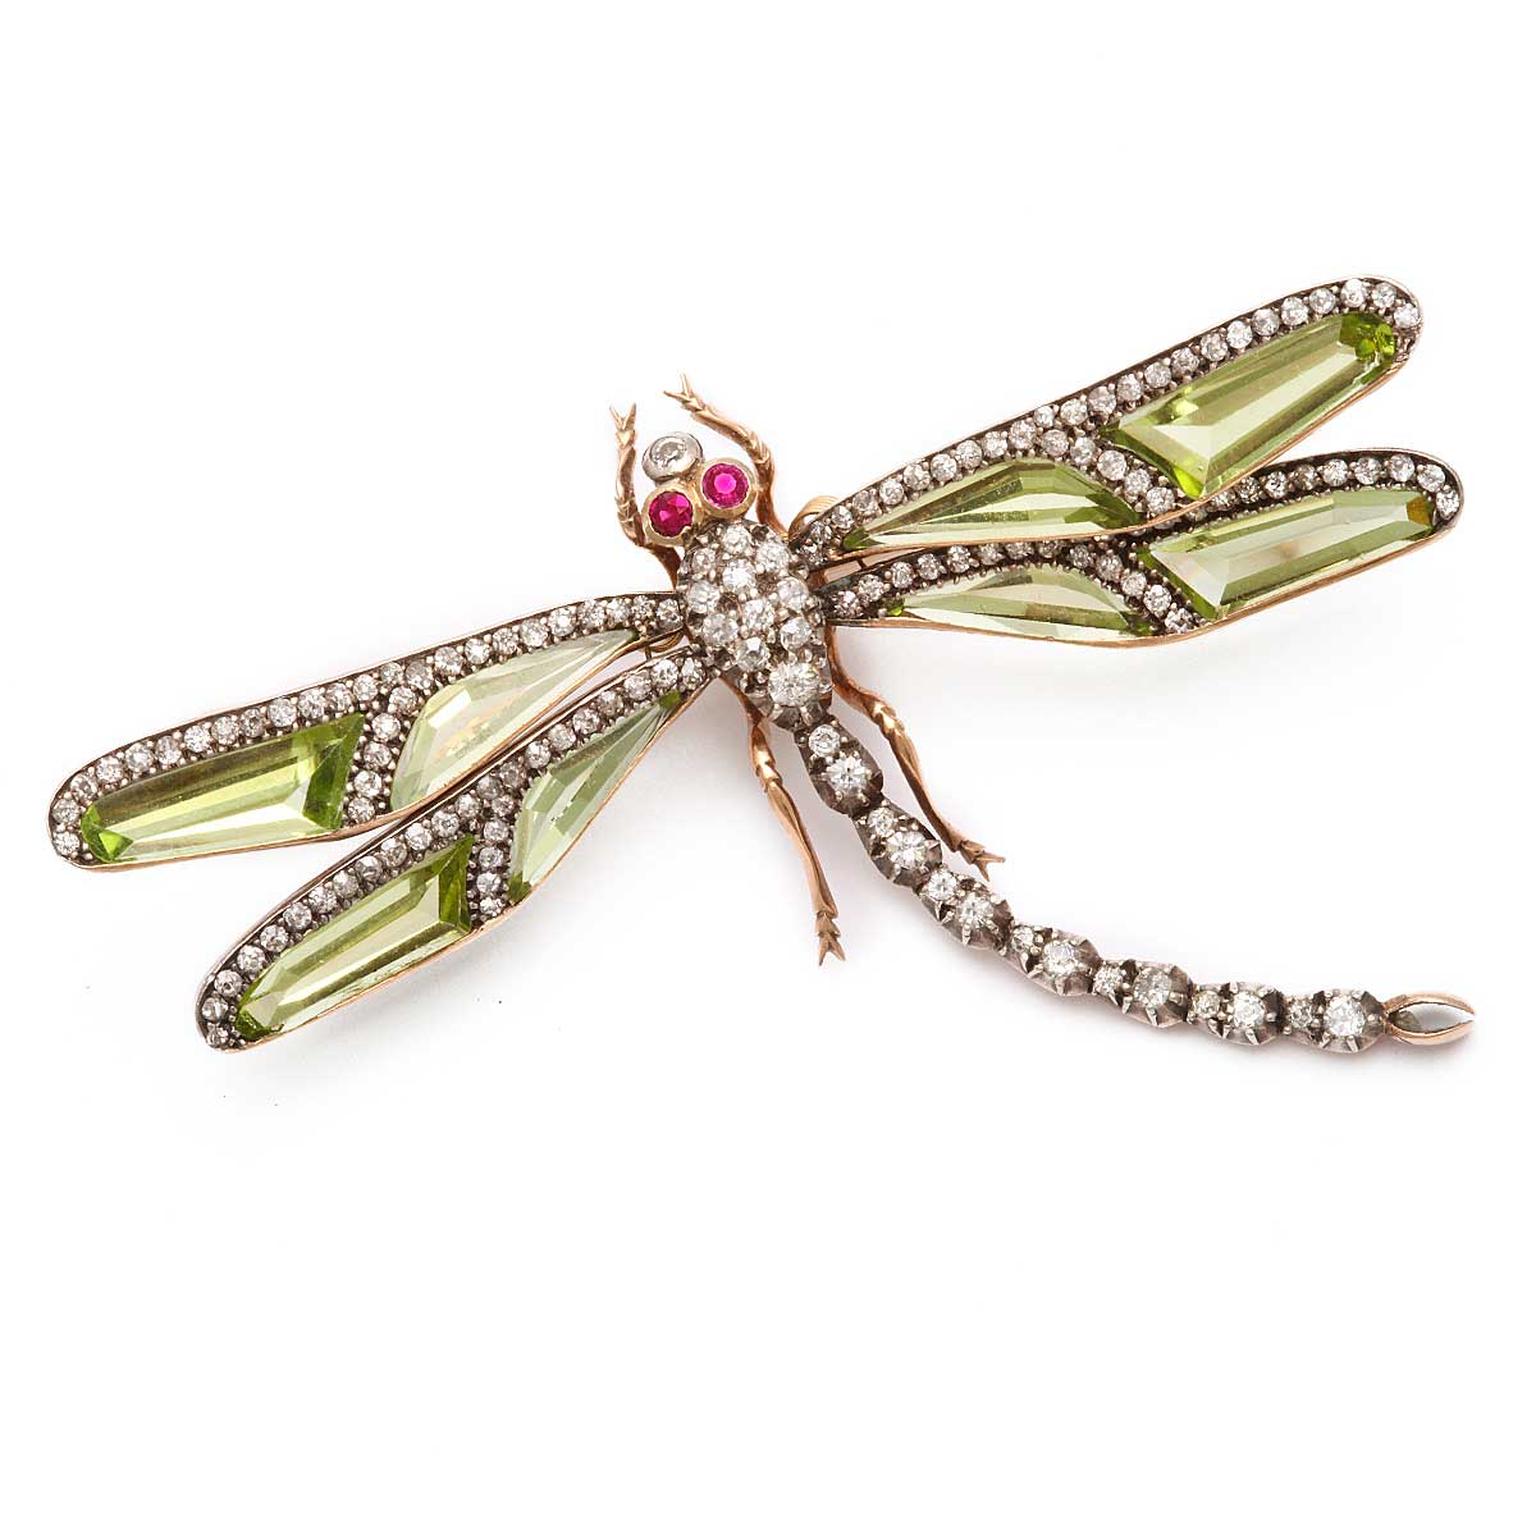 A La Vieille Russie Victorian dragonfly pin with peridot and diamonds